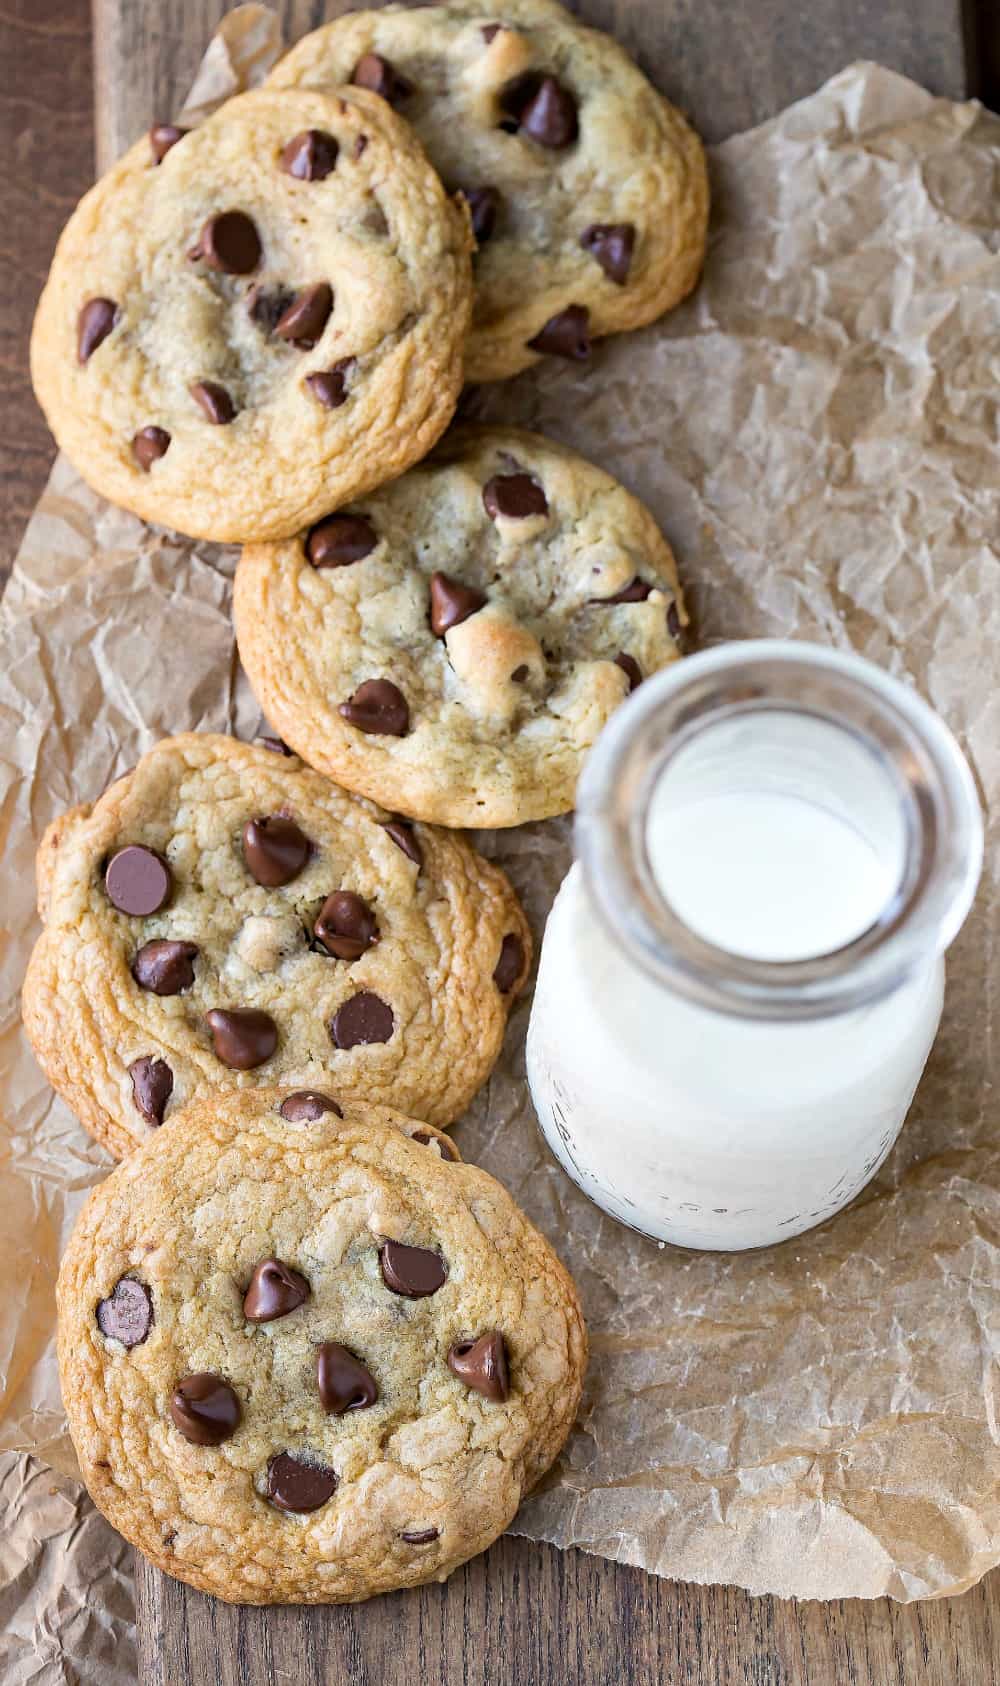 Chewy Chocolate Chip Cookie Recipe I Heart Eating